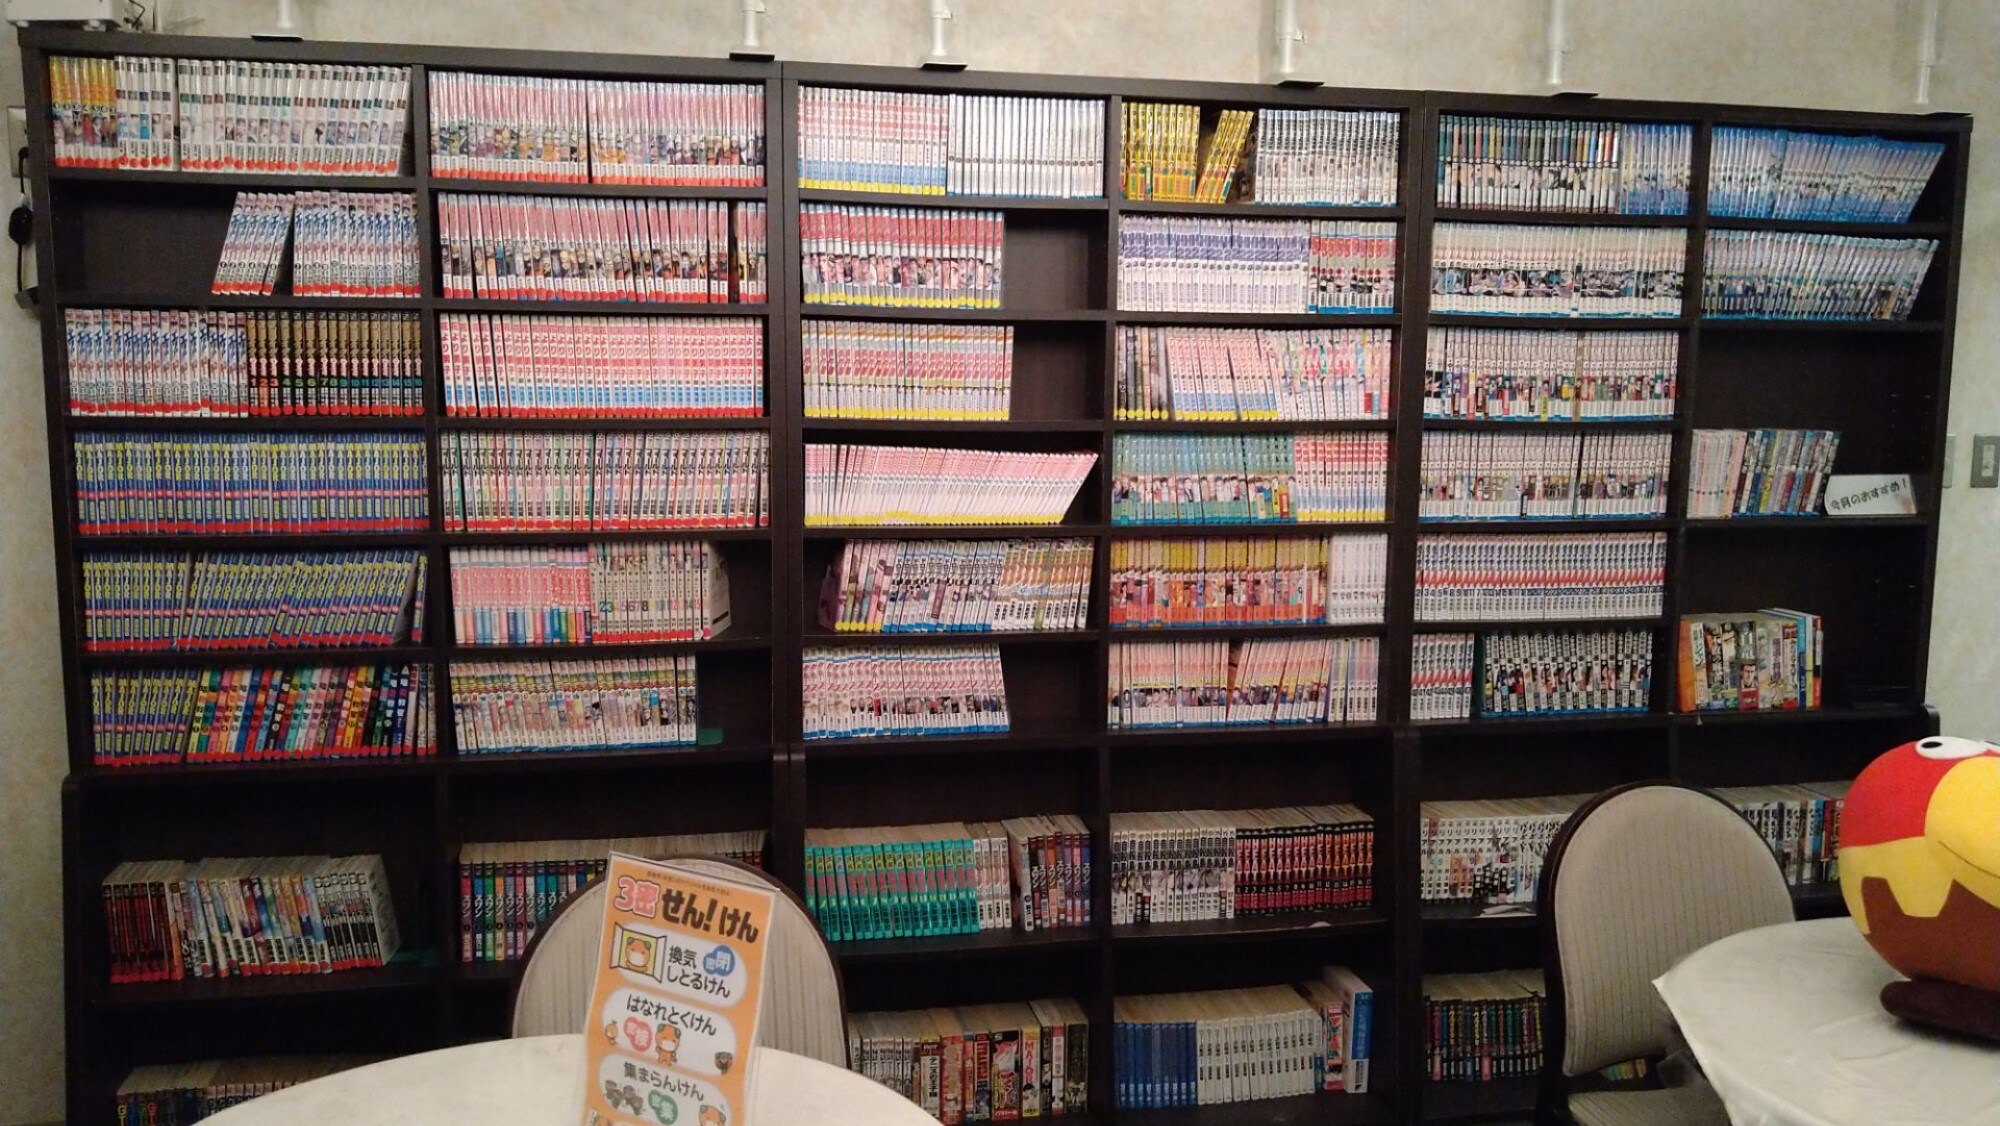 [Manga Corner] There are about 2,000 books in the relaxation room on the 8th floor.